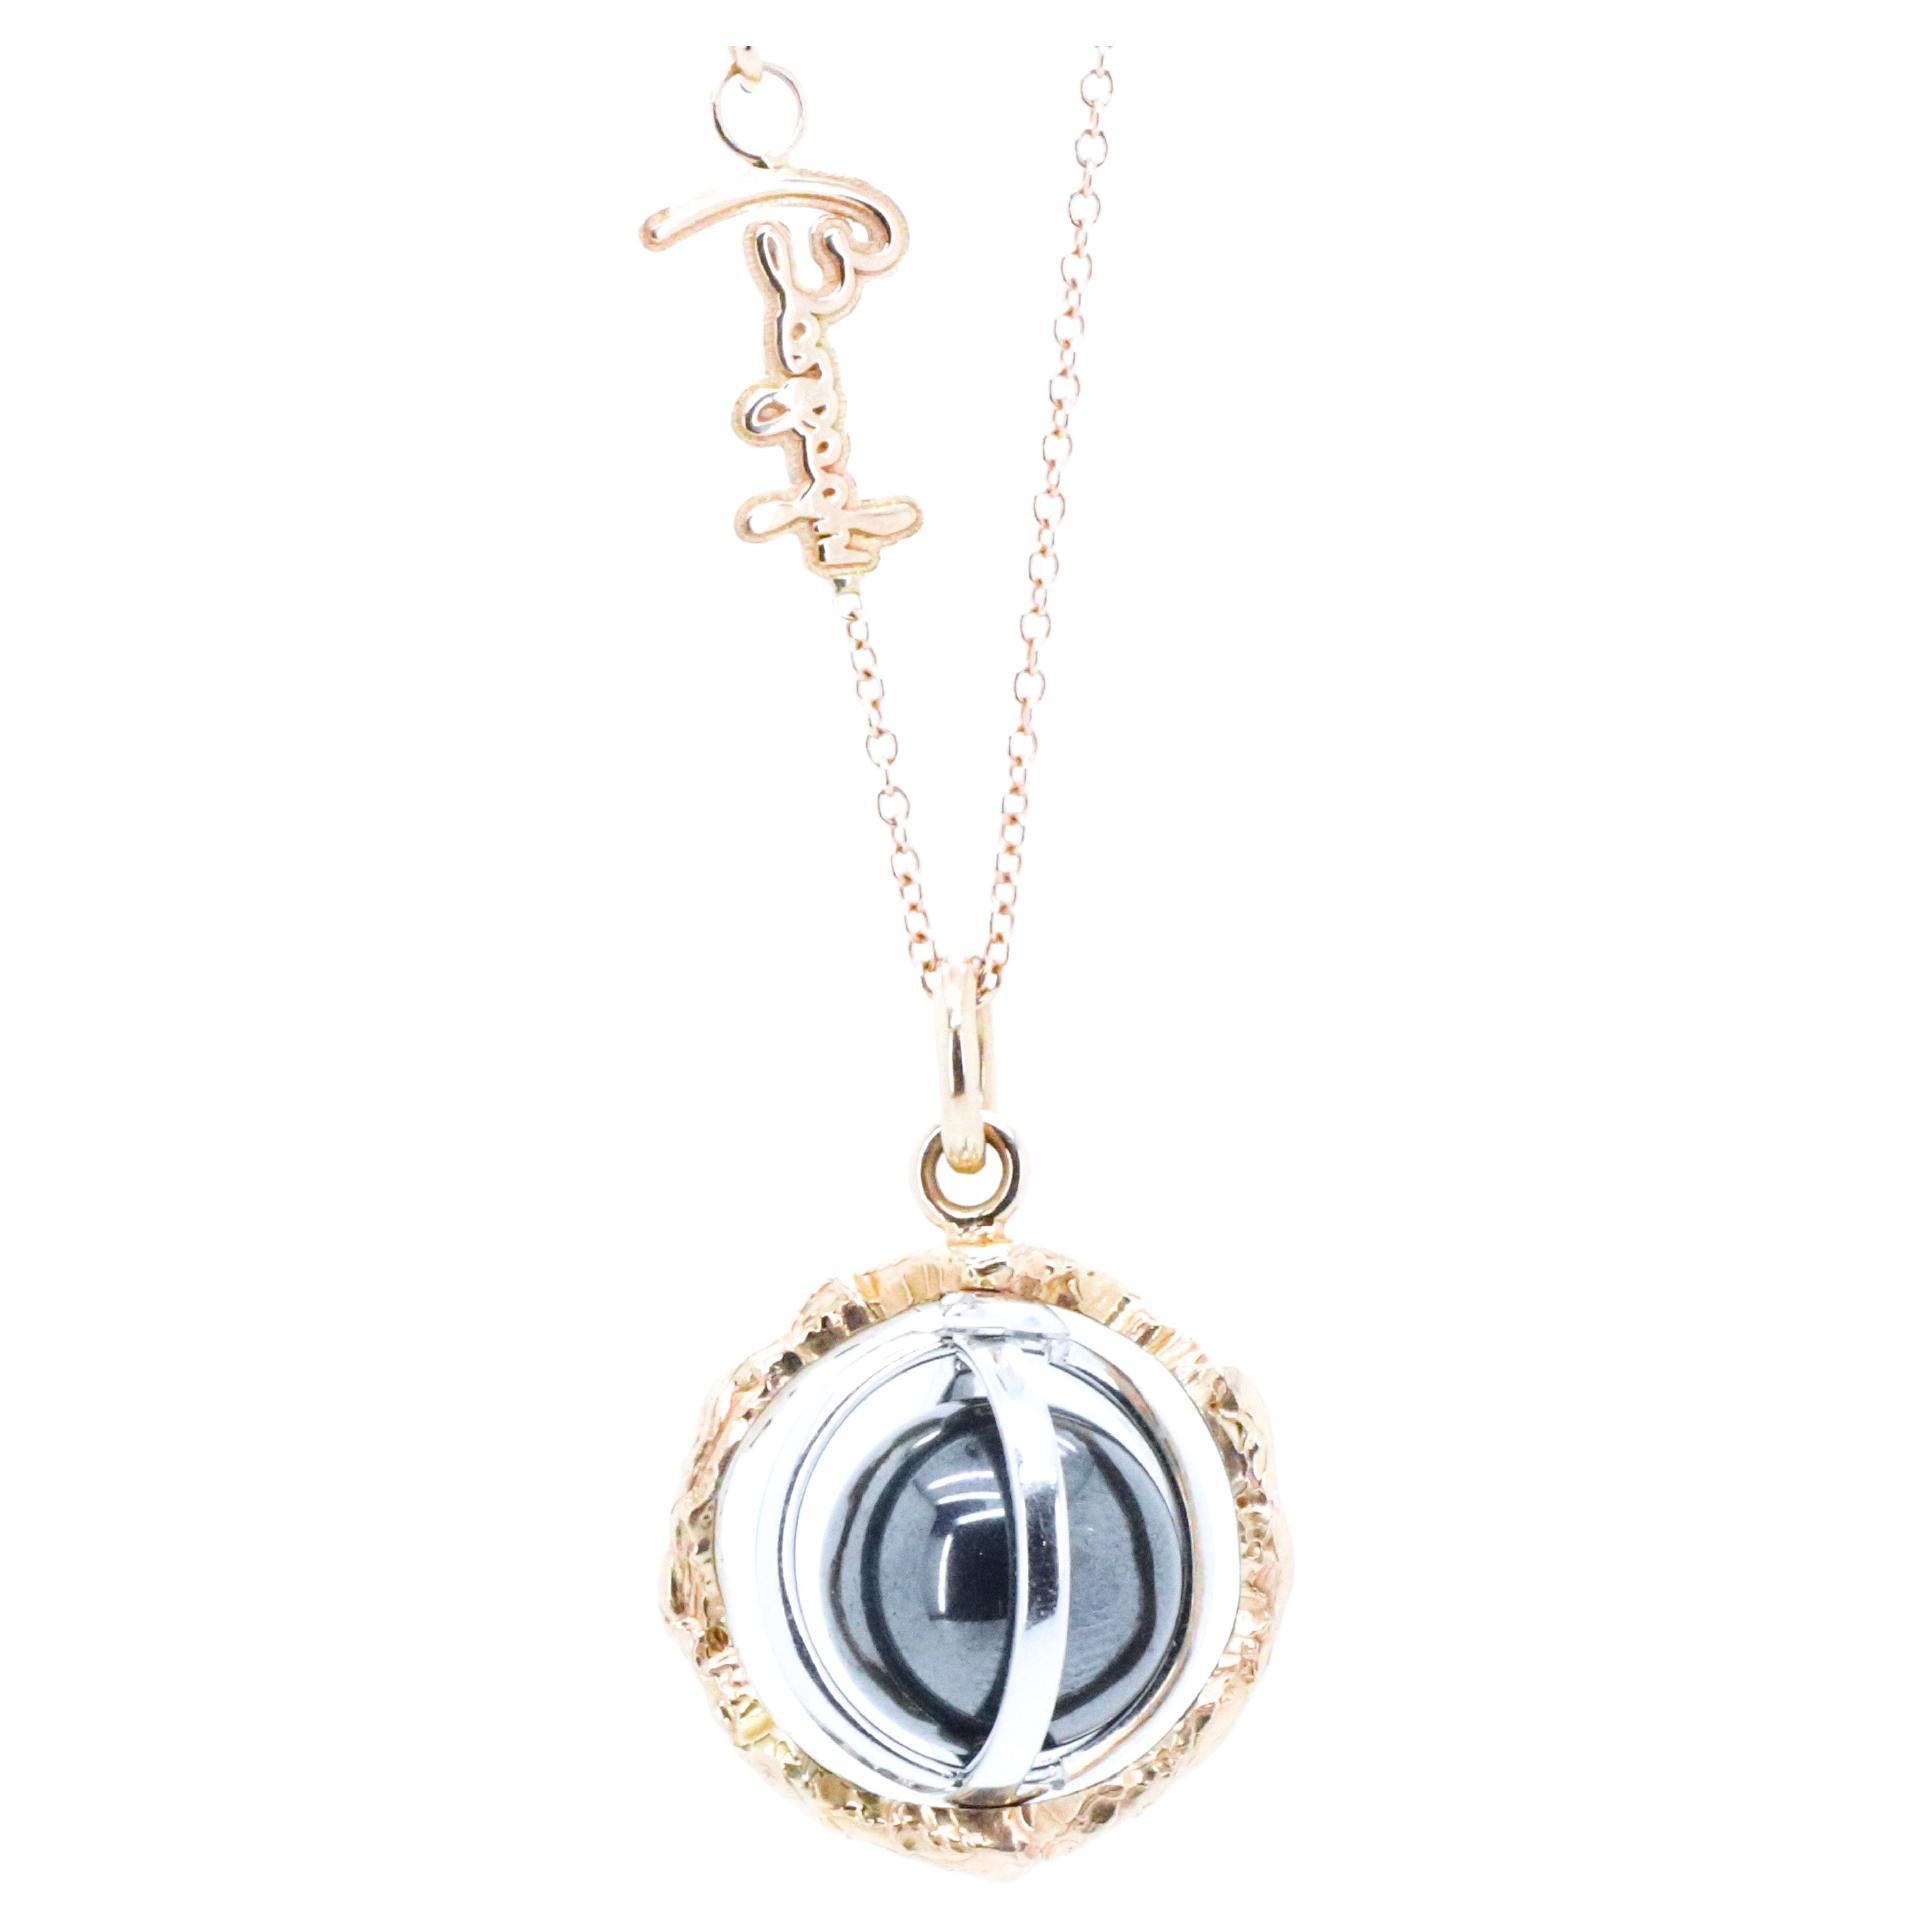 18k Gold Made in Italy Hematite Changeable Gem Revolving Loops Essence Necklace.
Experience the Wellbeing of Sound and Gemstones with the Sonoro Pendant Necklace.
Unlock Your Divine Potential with the Sonoro pendant. 
Gems and metal are